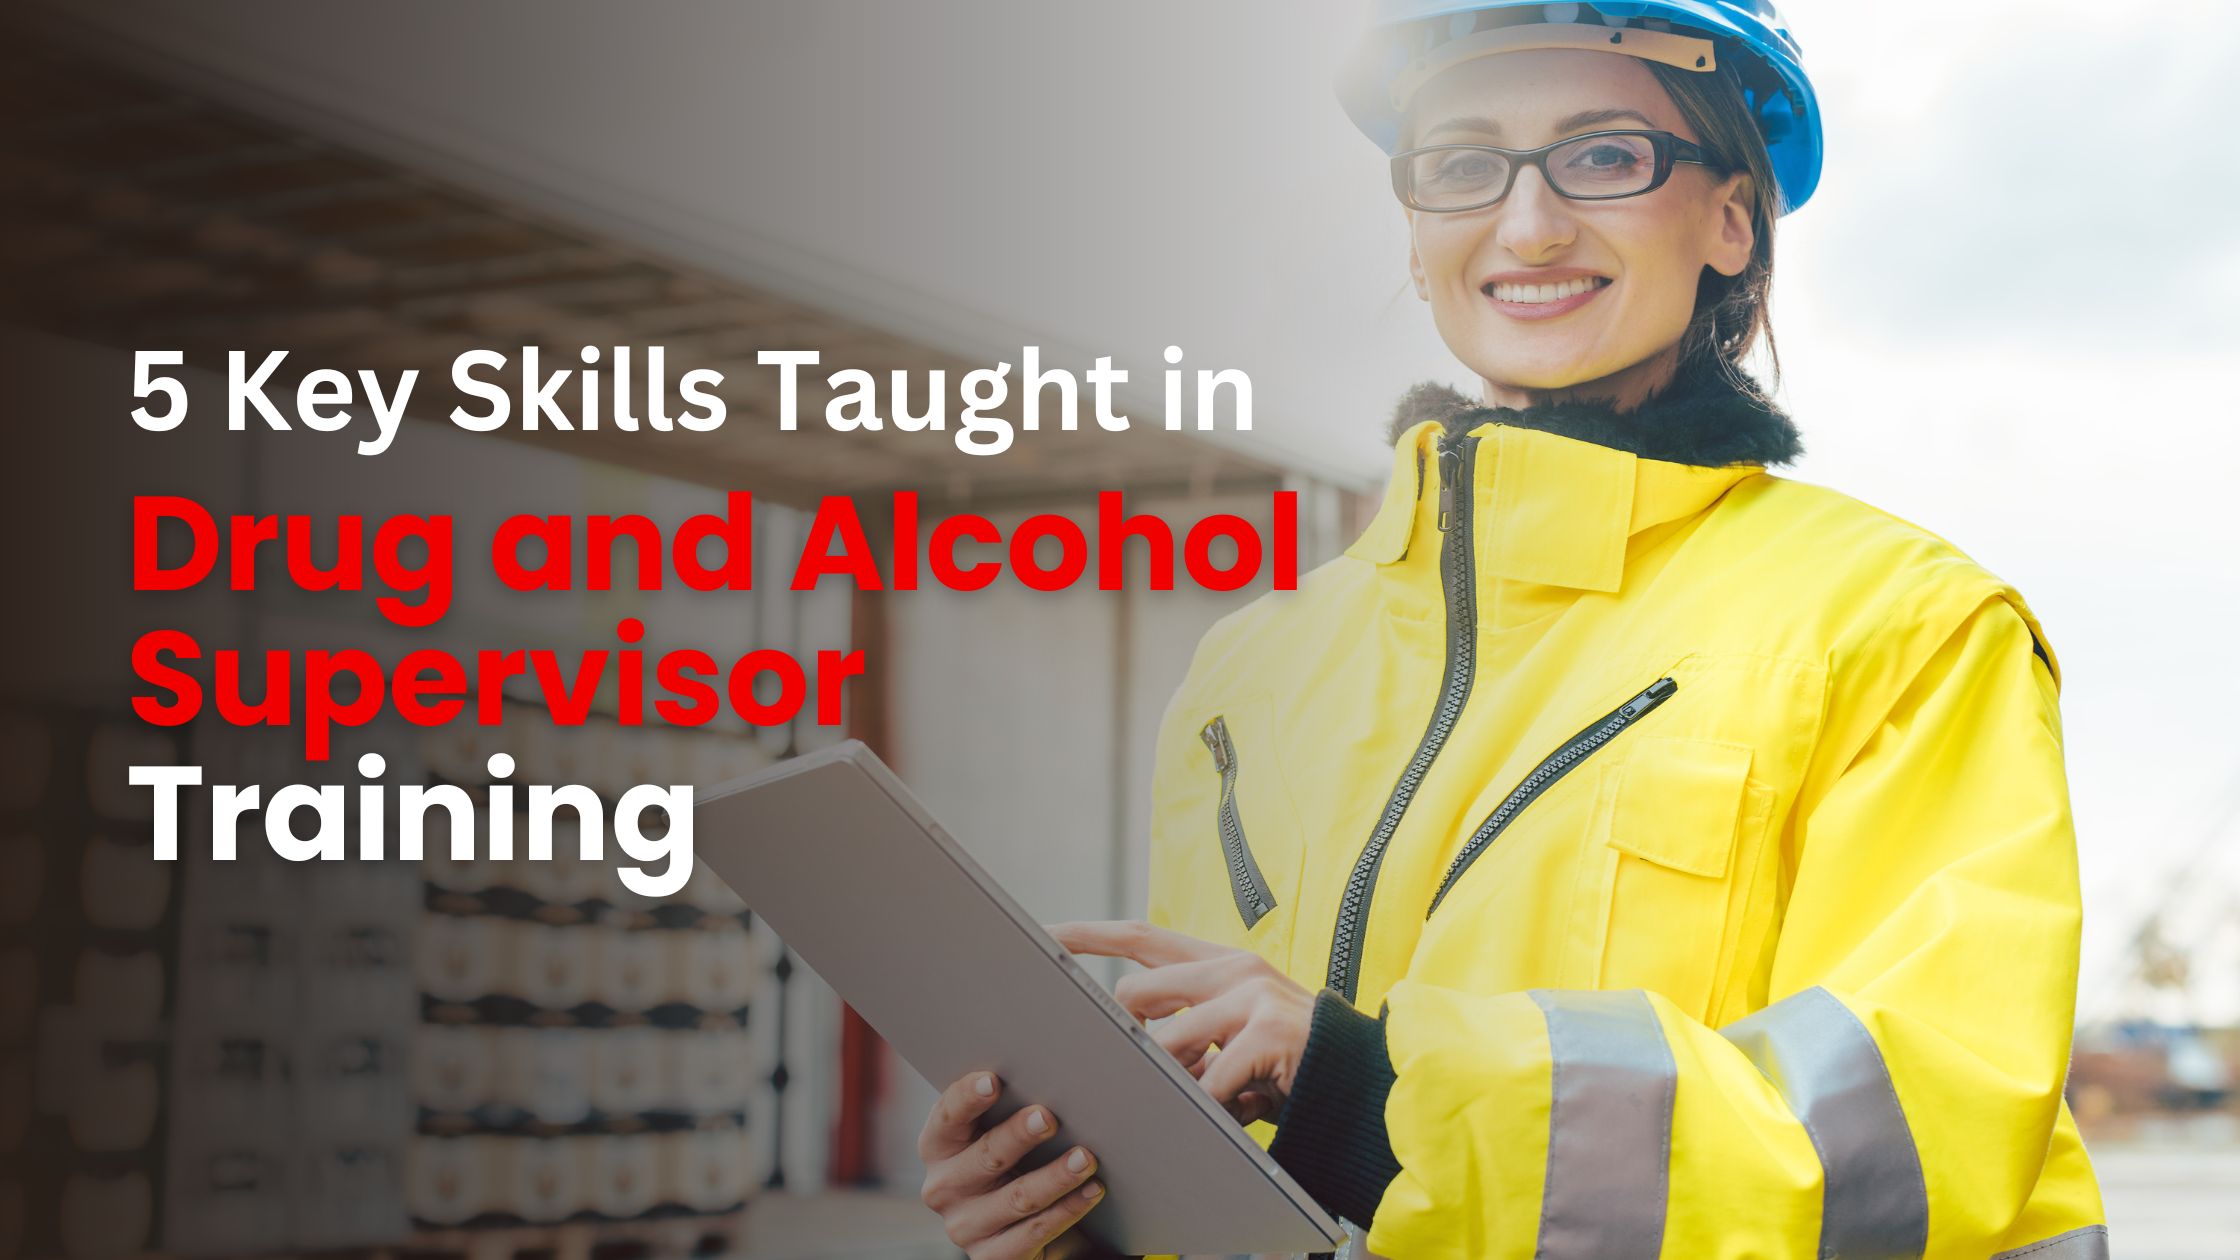 5 Key Skills Taught in Drug and Alcohol Supervisor Training